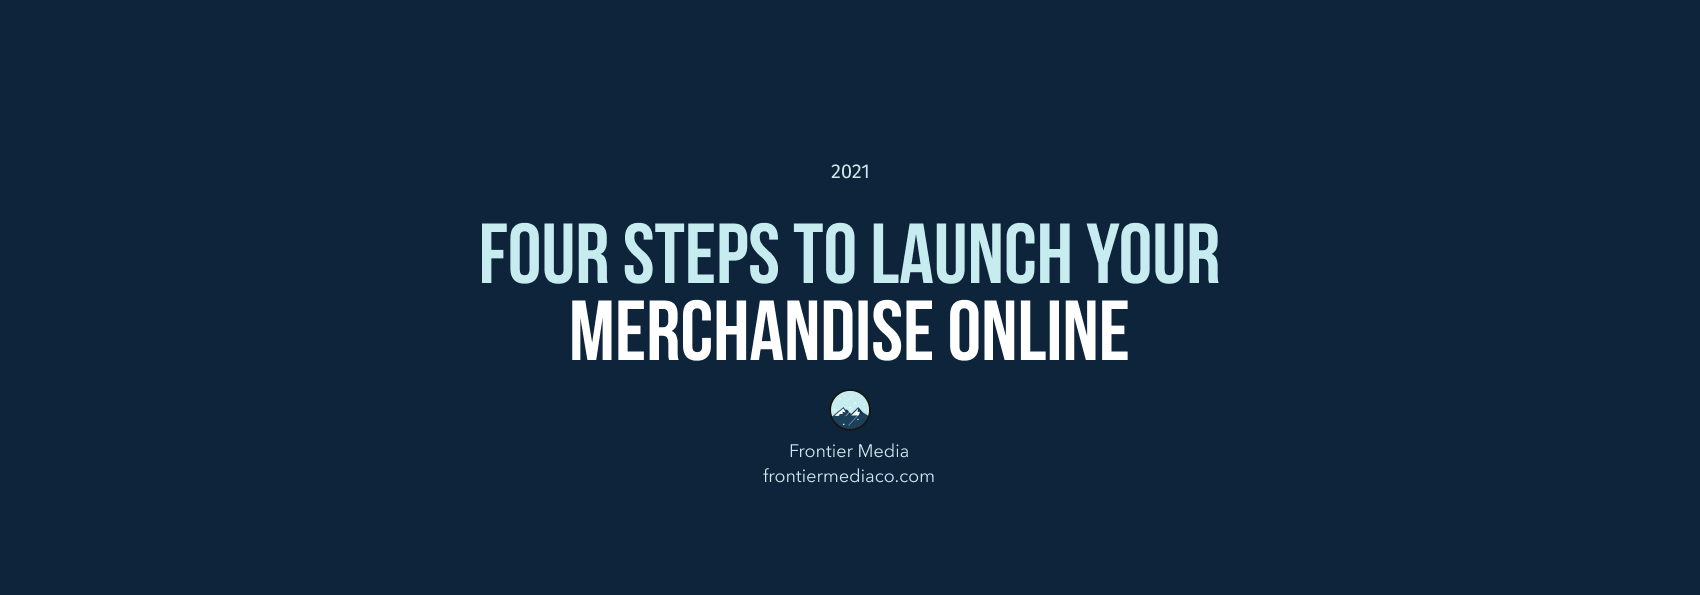 Four Steps to Launch Your Merchandise Online